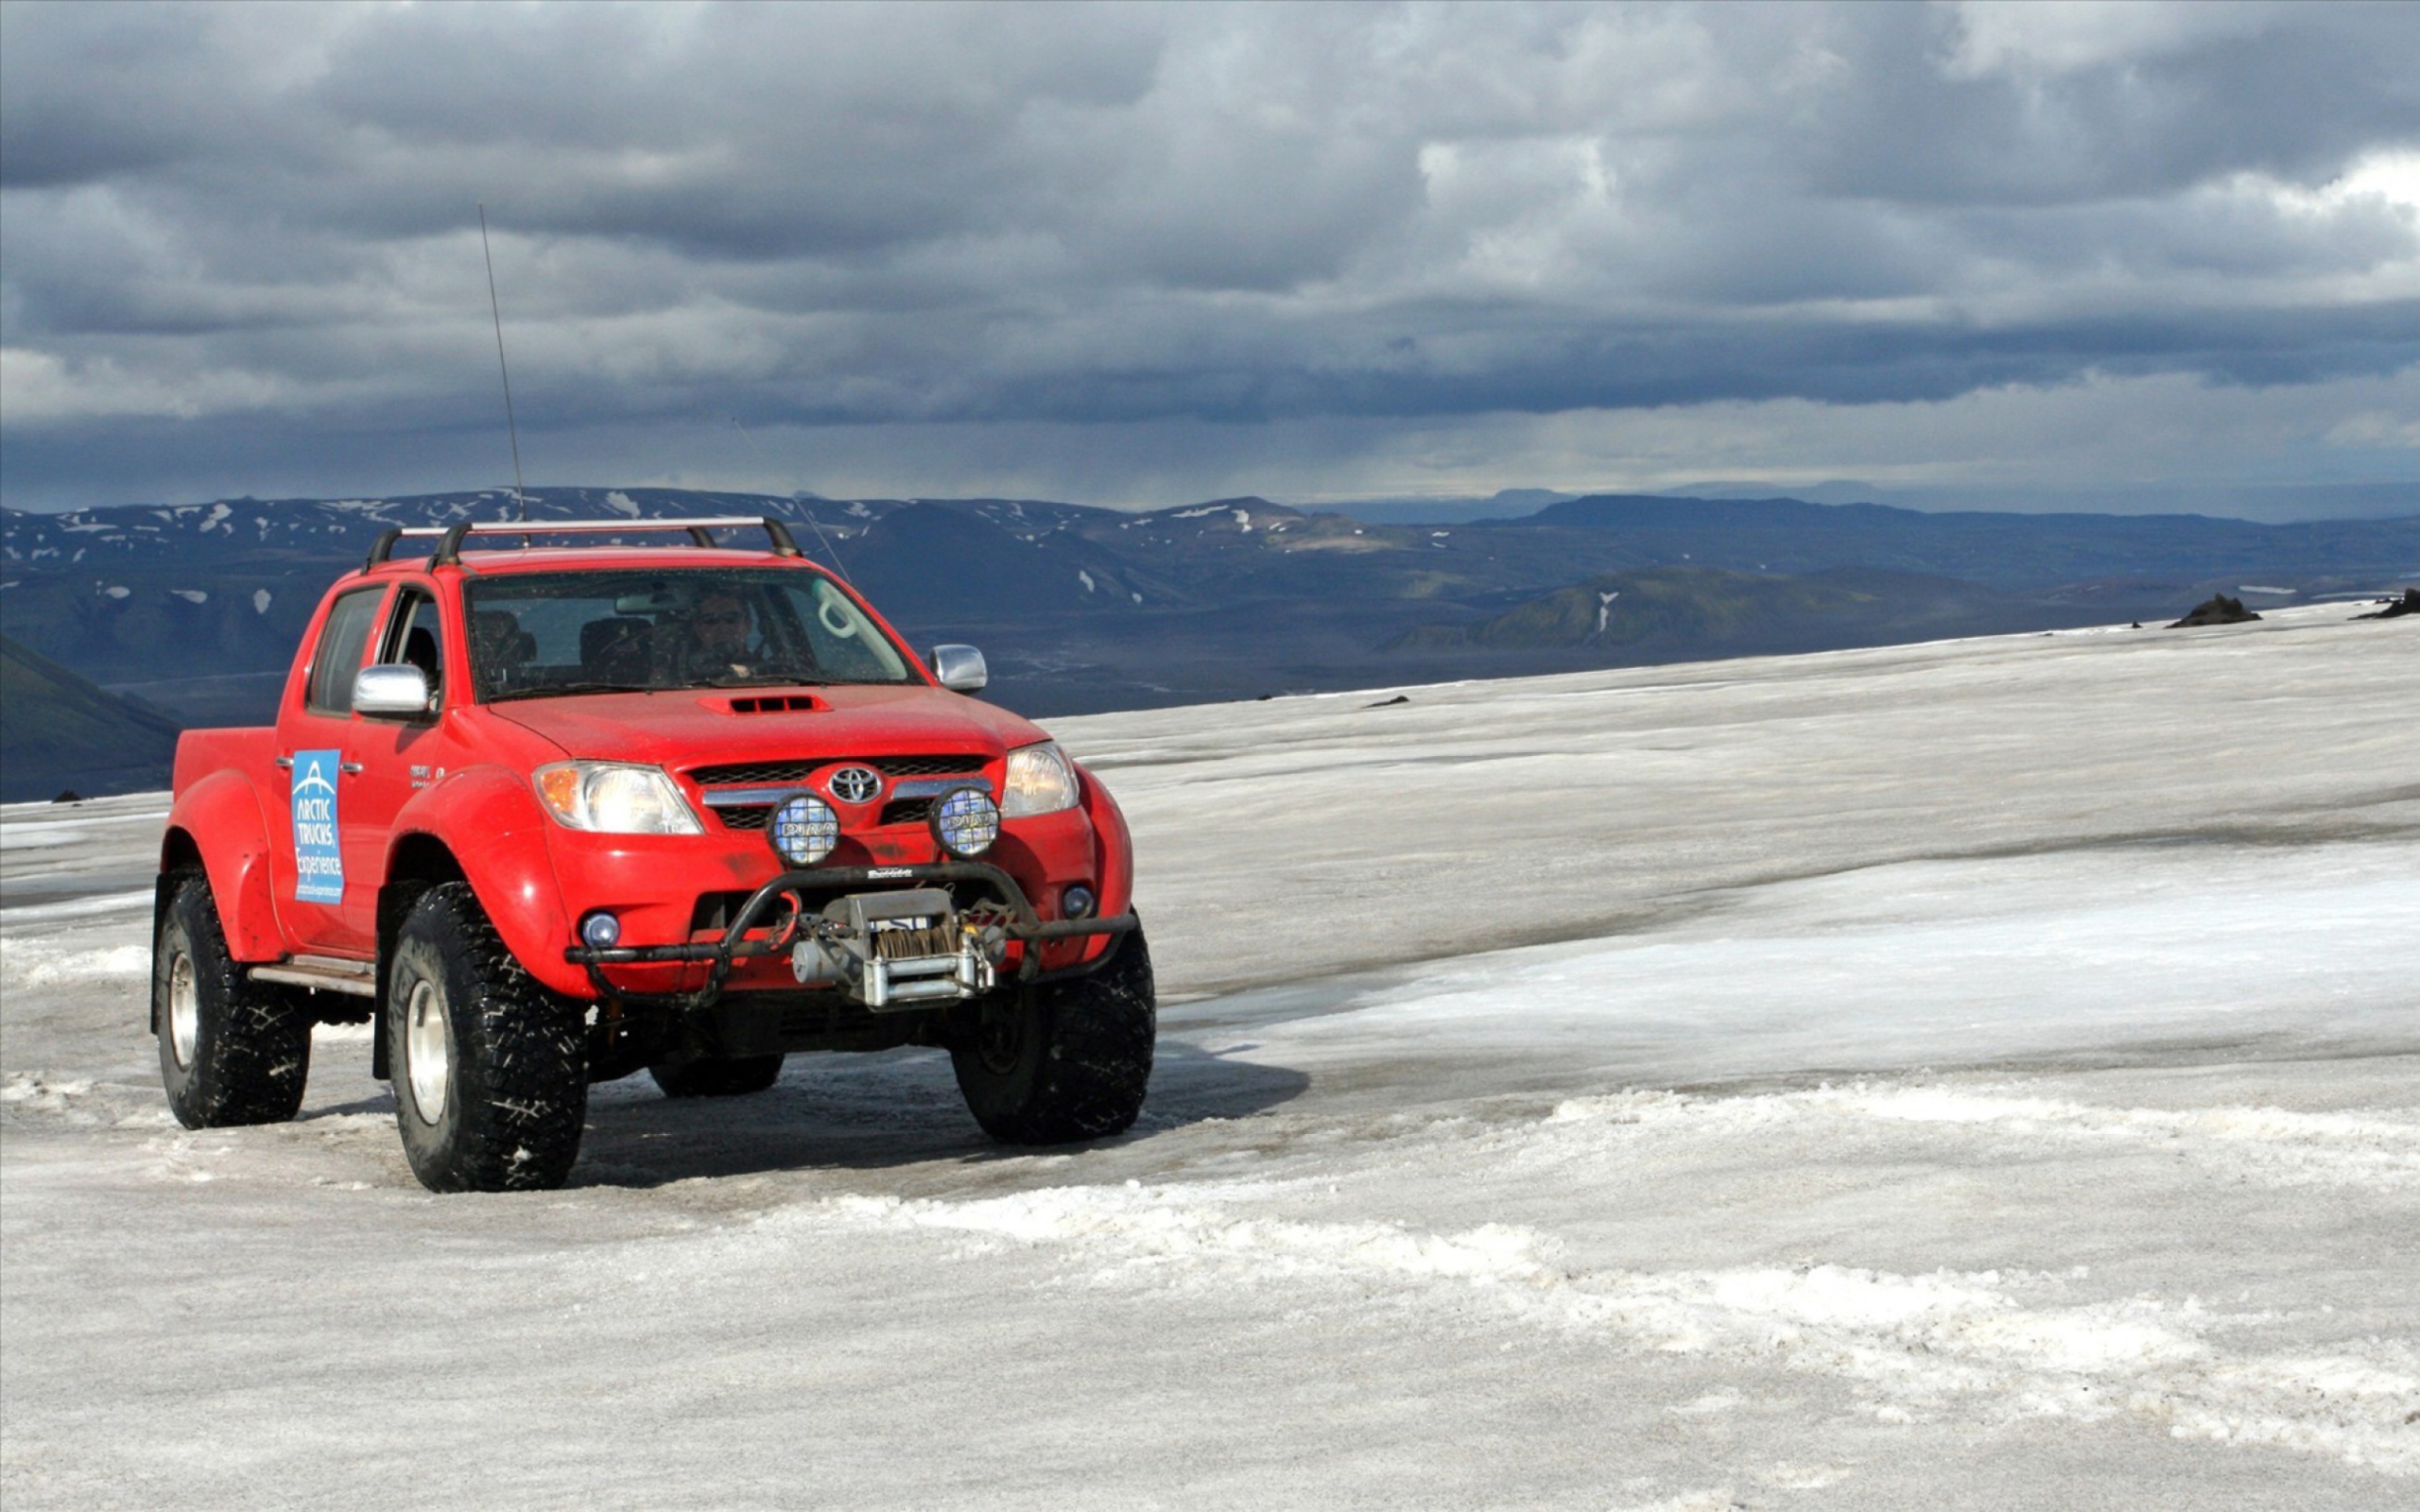 Toyota Hilux Tuning wallpaper 2560x1600